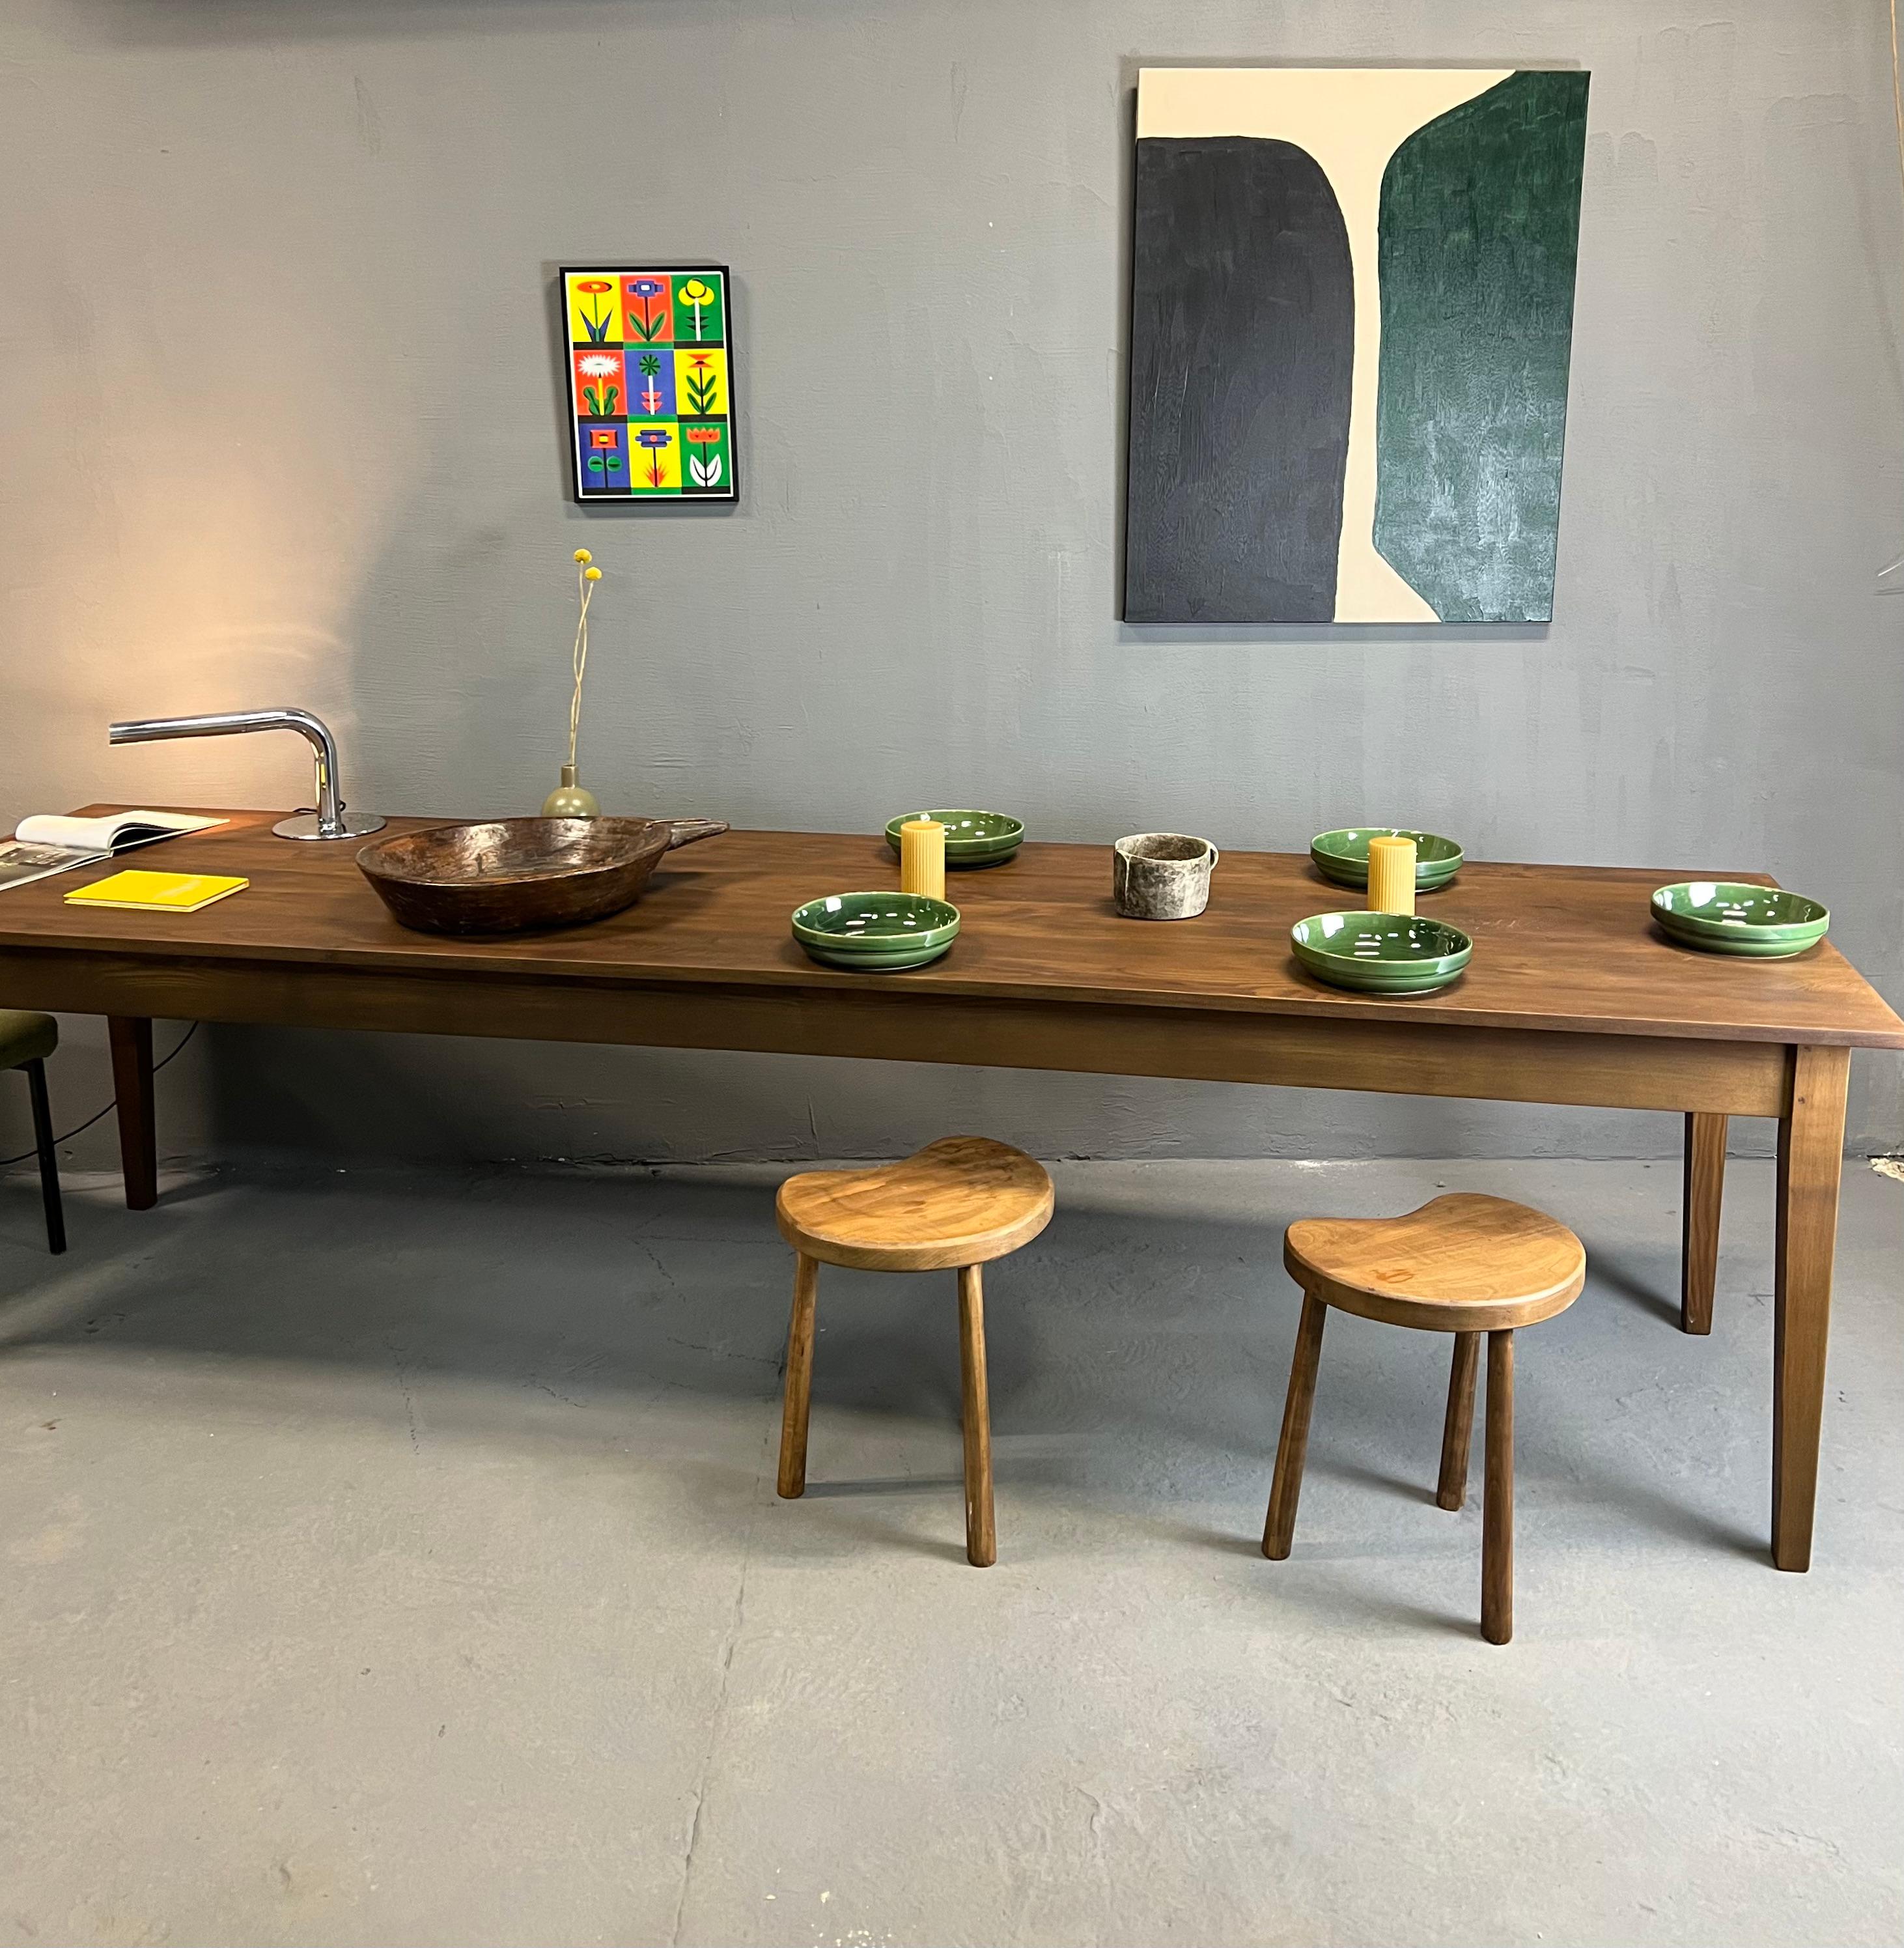 Very nice table 3 meters long in solid ash. It is made up of a 2 cm thick top and its dimensions are ideal to accommodate up to 14 guests easily: 3 meters long, 90 cm wide and 77 cm high with a height under the band of 63.5 cm. It is beautifully